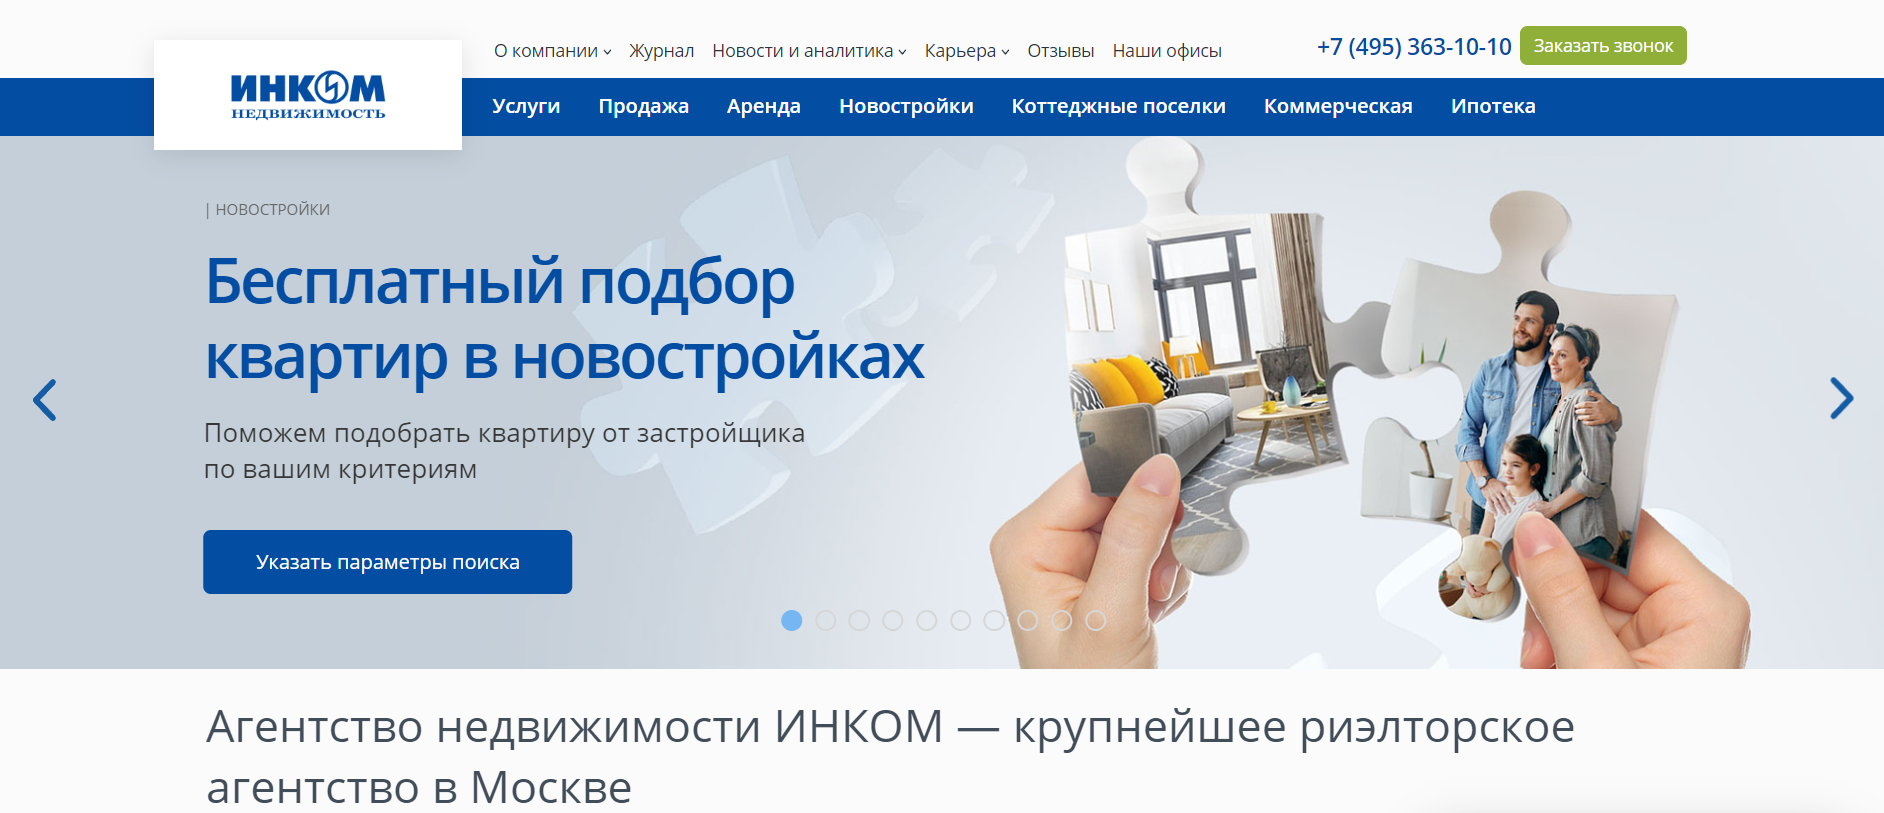 INKOM-Real Estate in Moscow: Important Facts Before Collaboration